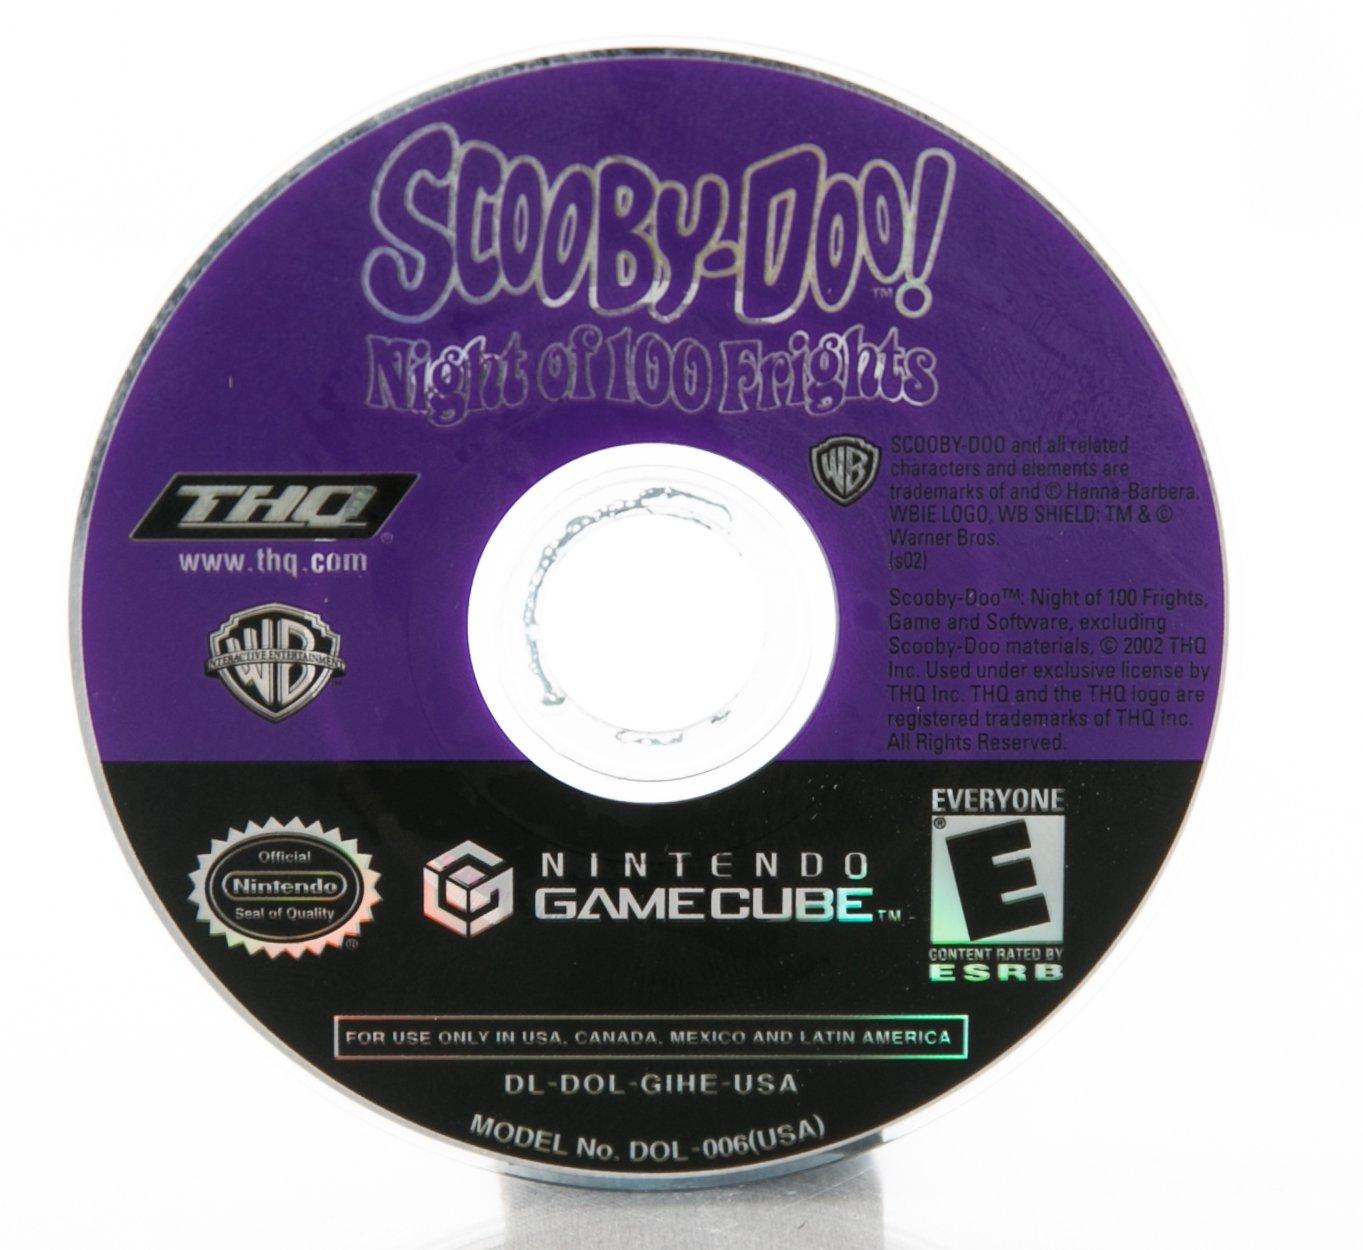 scooby doo 100 nights of frights ps4